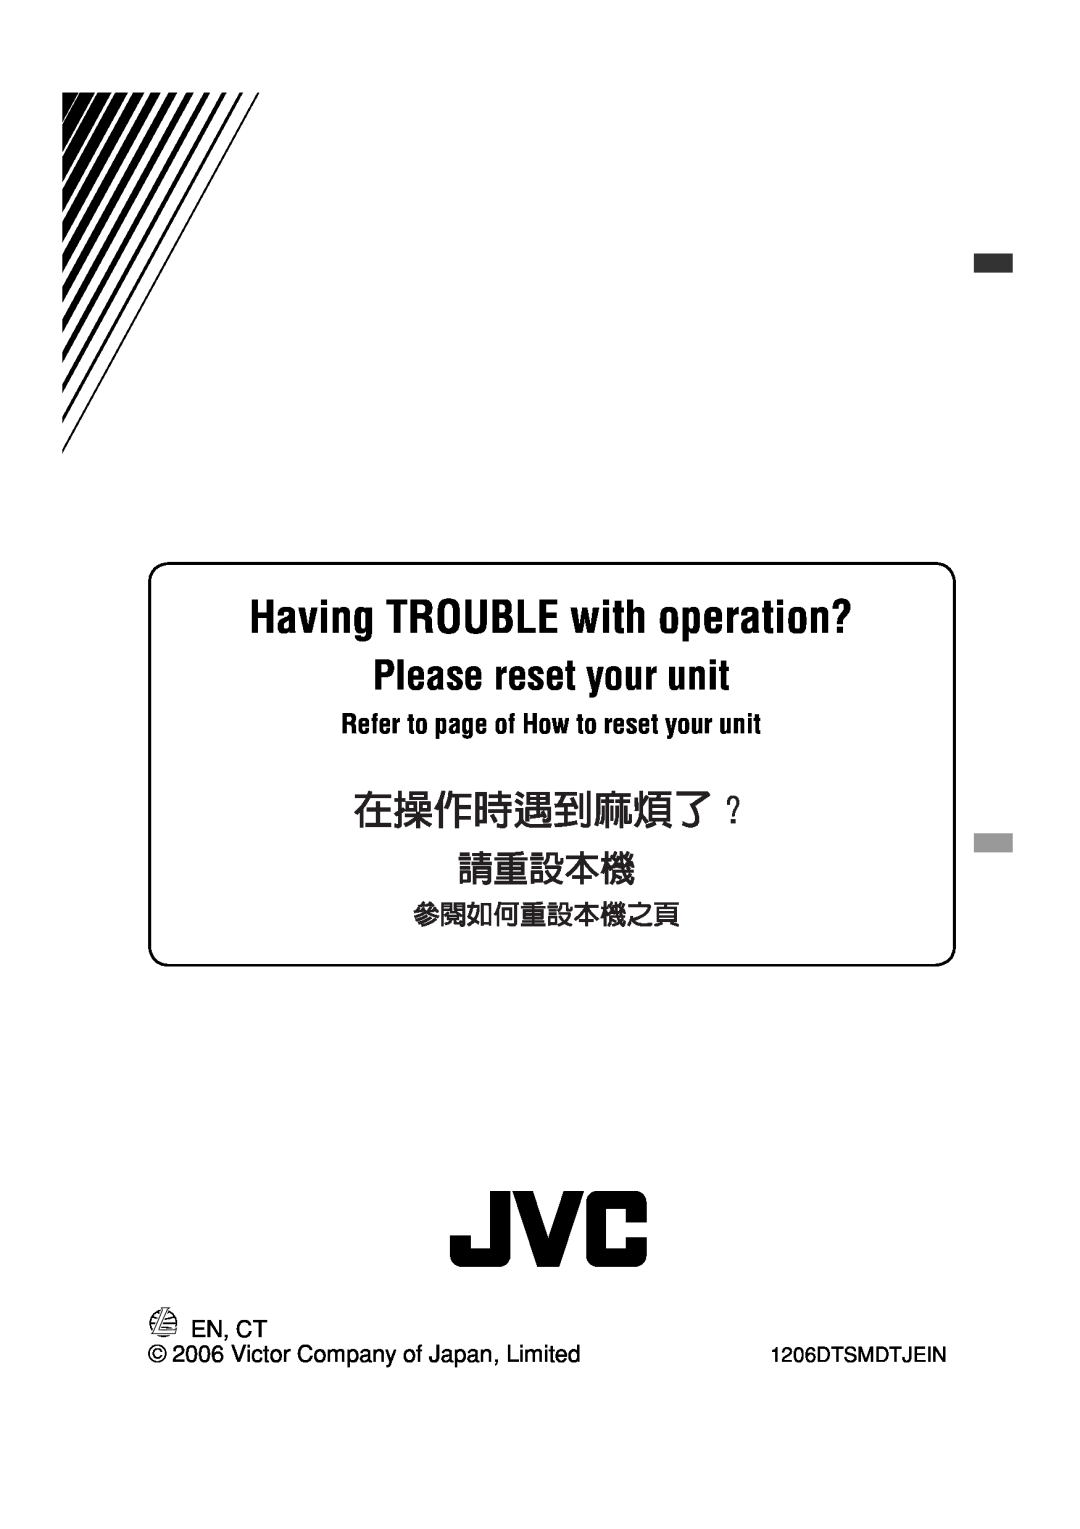 JVC GET0425-001A Having TROUBLE with operation?, Please reset your unit, Refer to page of How to reset your unit, En, Ct 